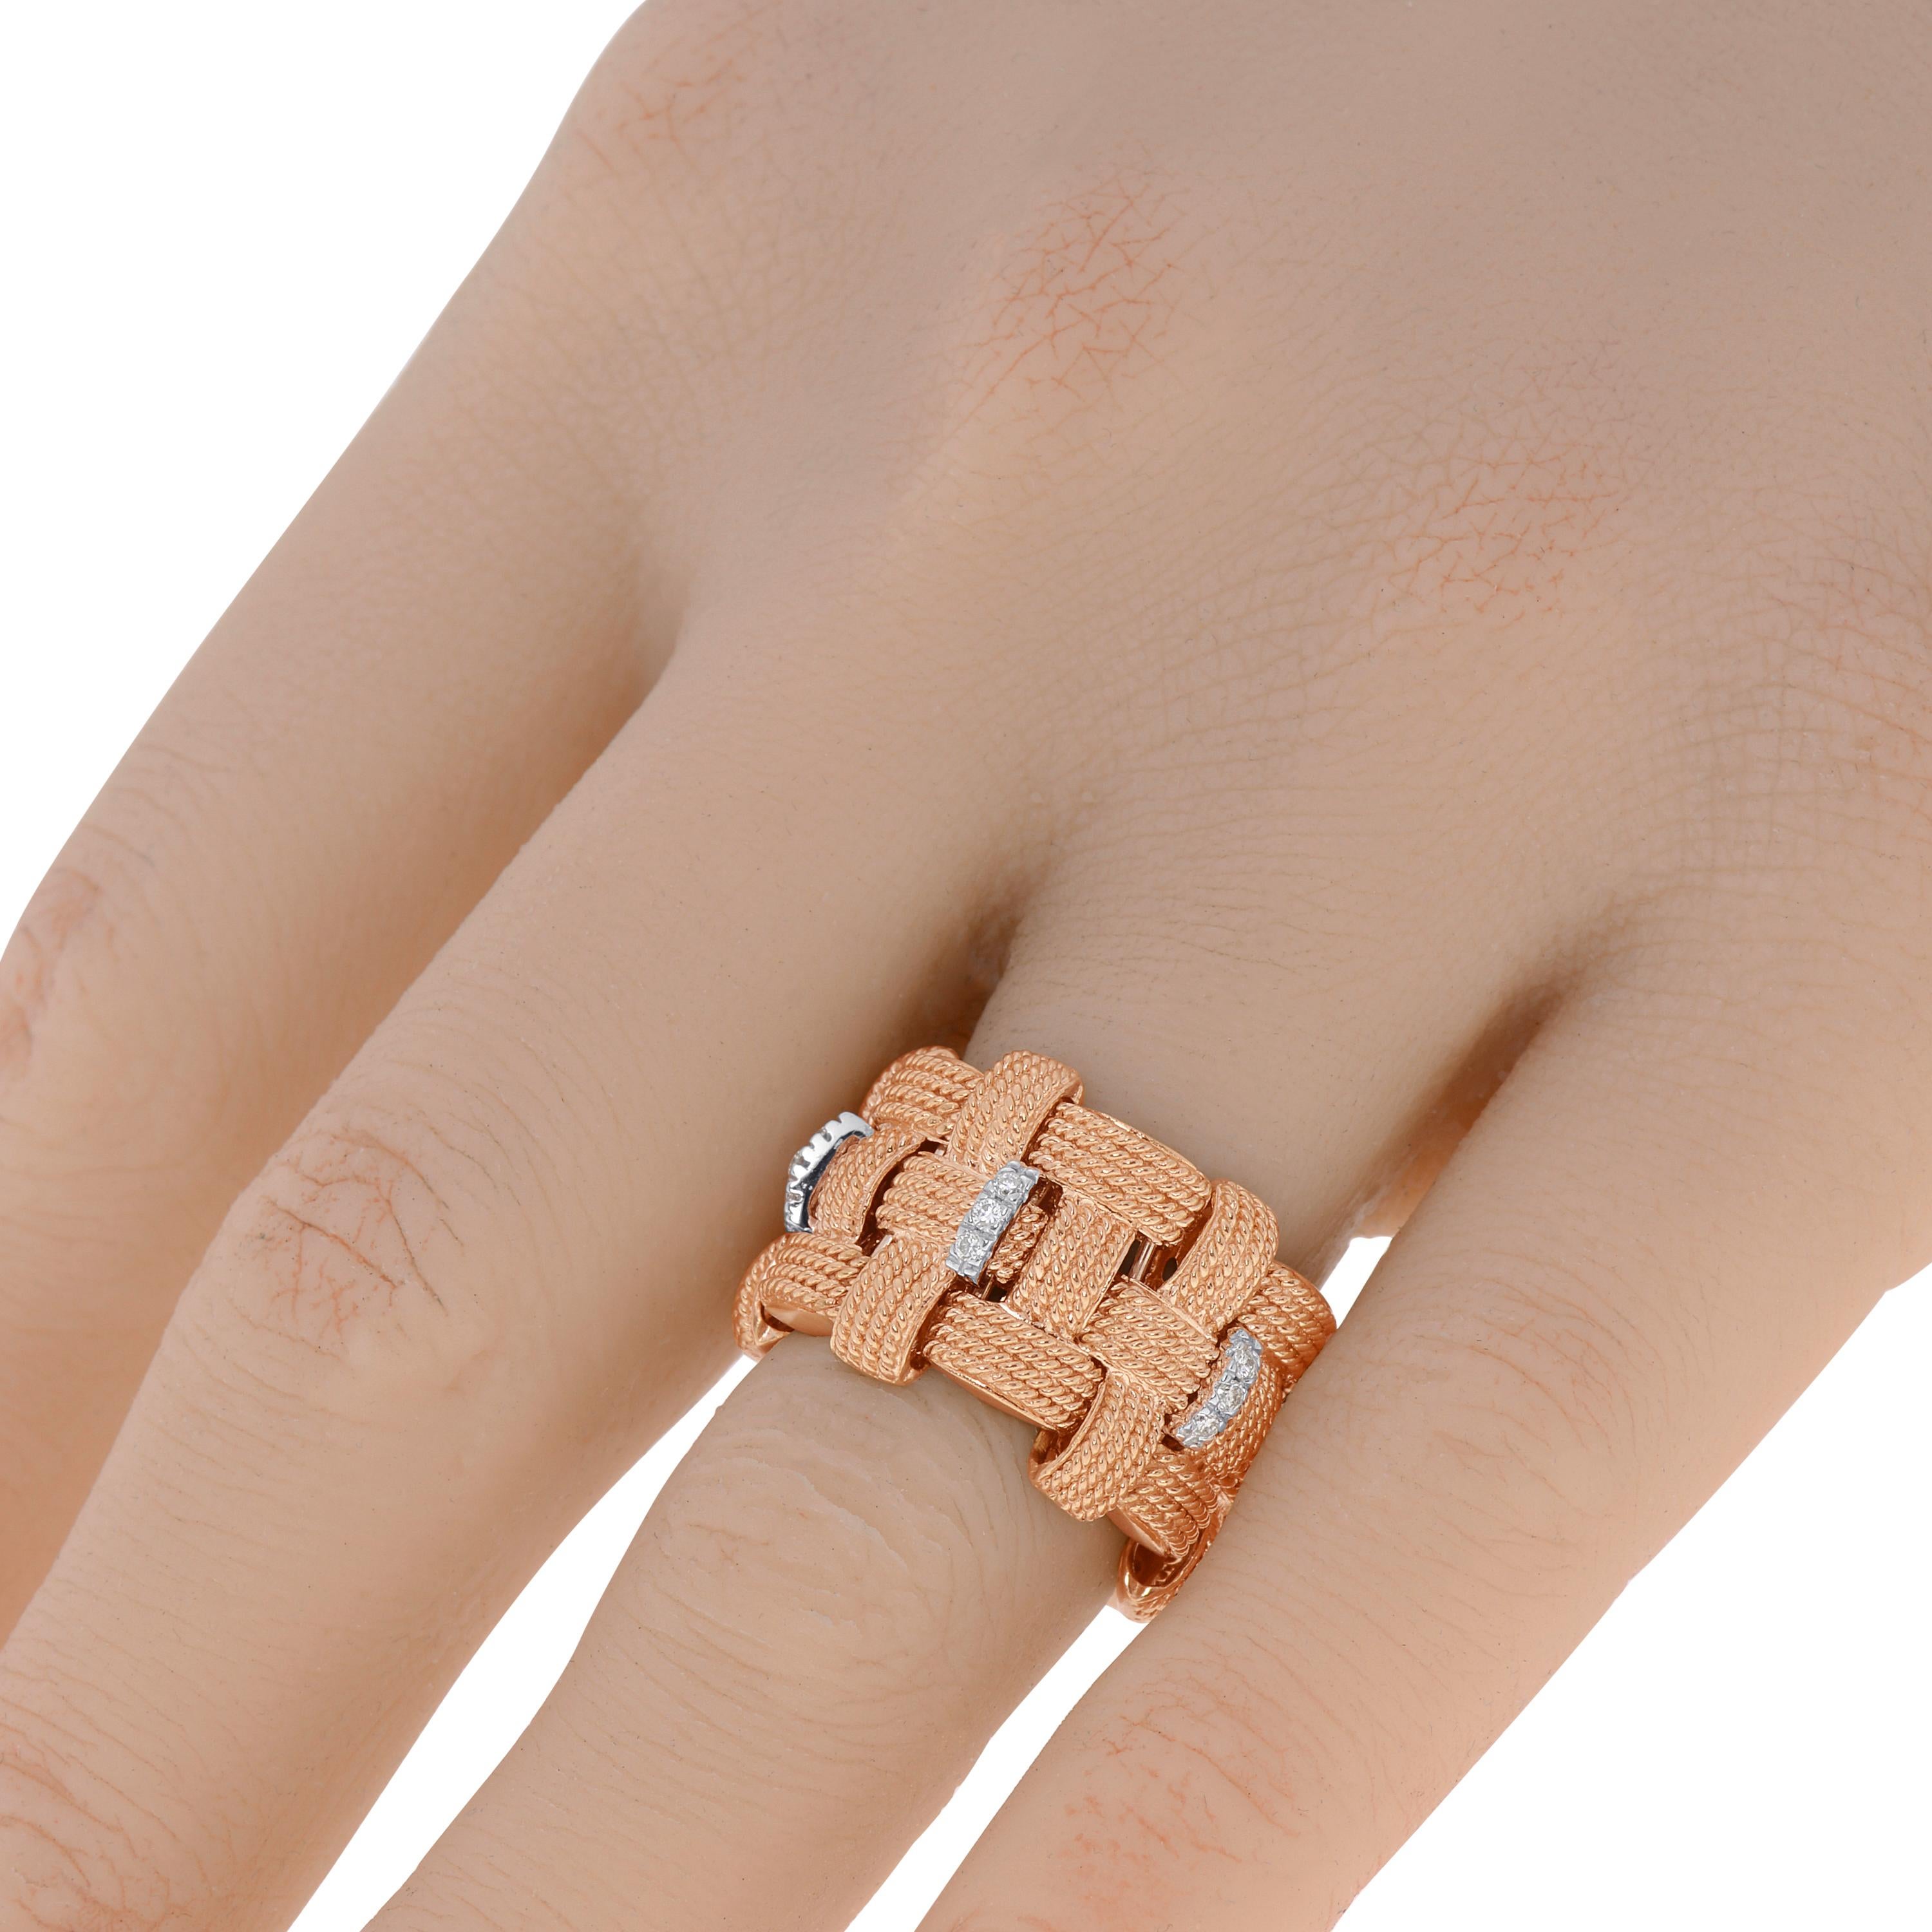 This beautiful Roberto Coin 18K Rose & White Gold Flexible Ring features 0.15ct. tw. diamonds set in 18K White Gold on a woven Rose Gold band. The ring size is 4.5 (48.0). The Band Width is 15mm. The Weight is 16.7g.
